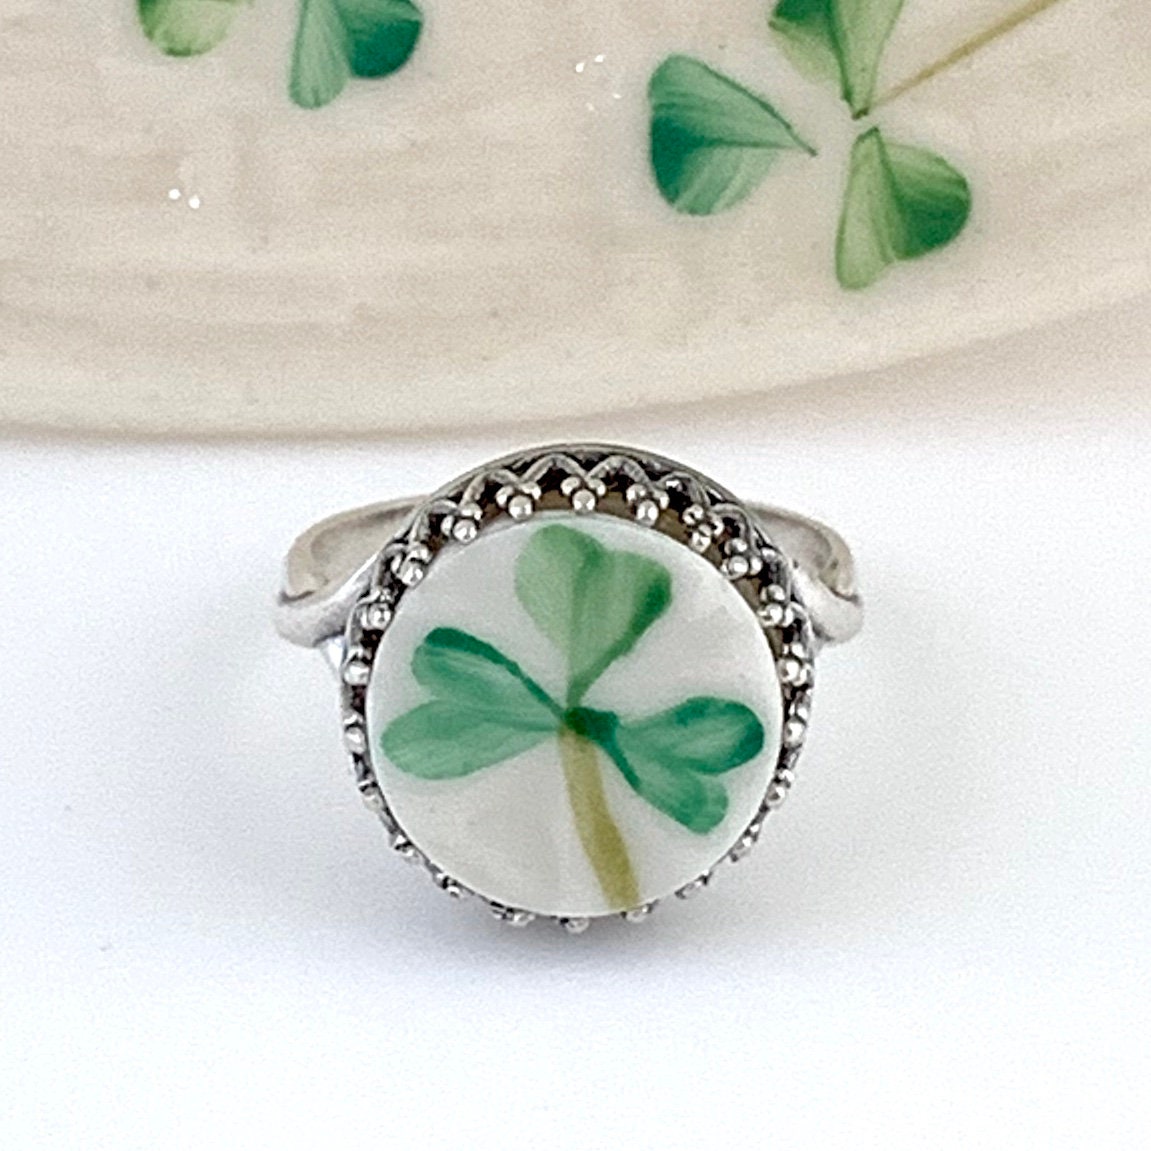 Sterling Silver Irish Ring, Belleek Broken China Jewelry, Celtic Ring, Adjustable Ring, Unique Gifts for Women